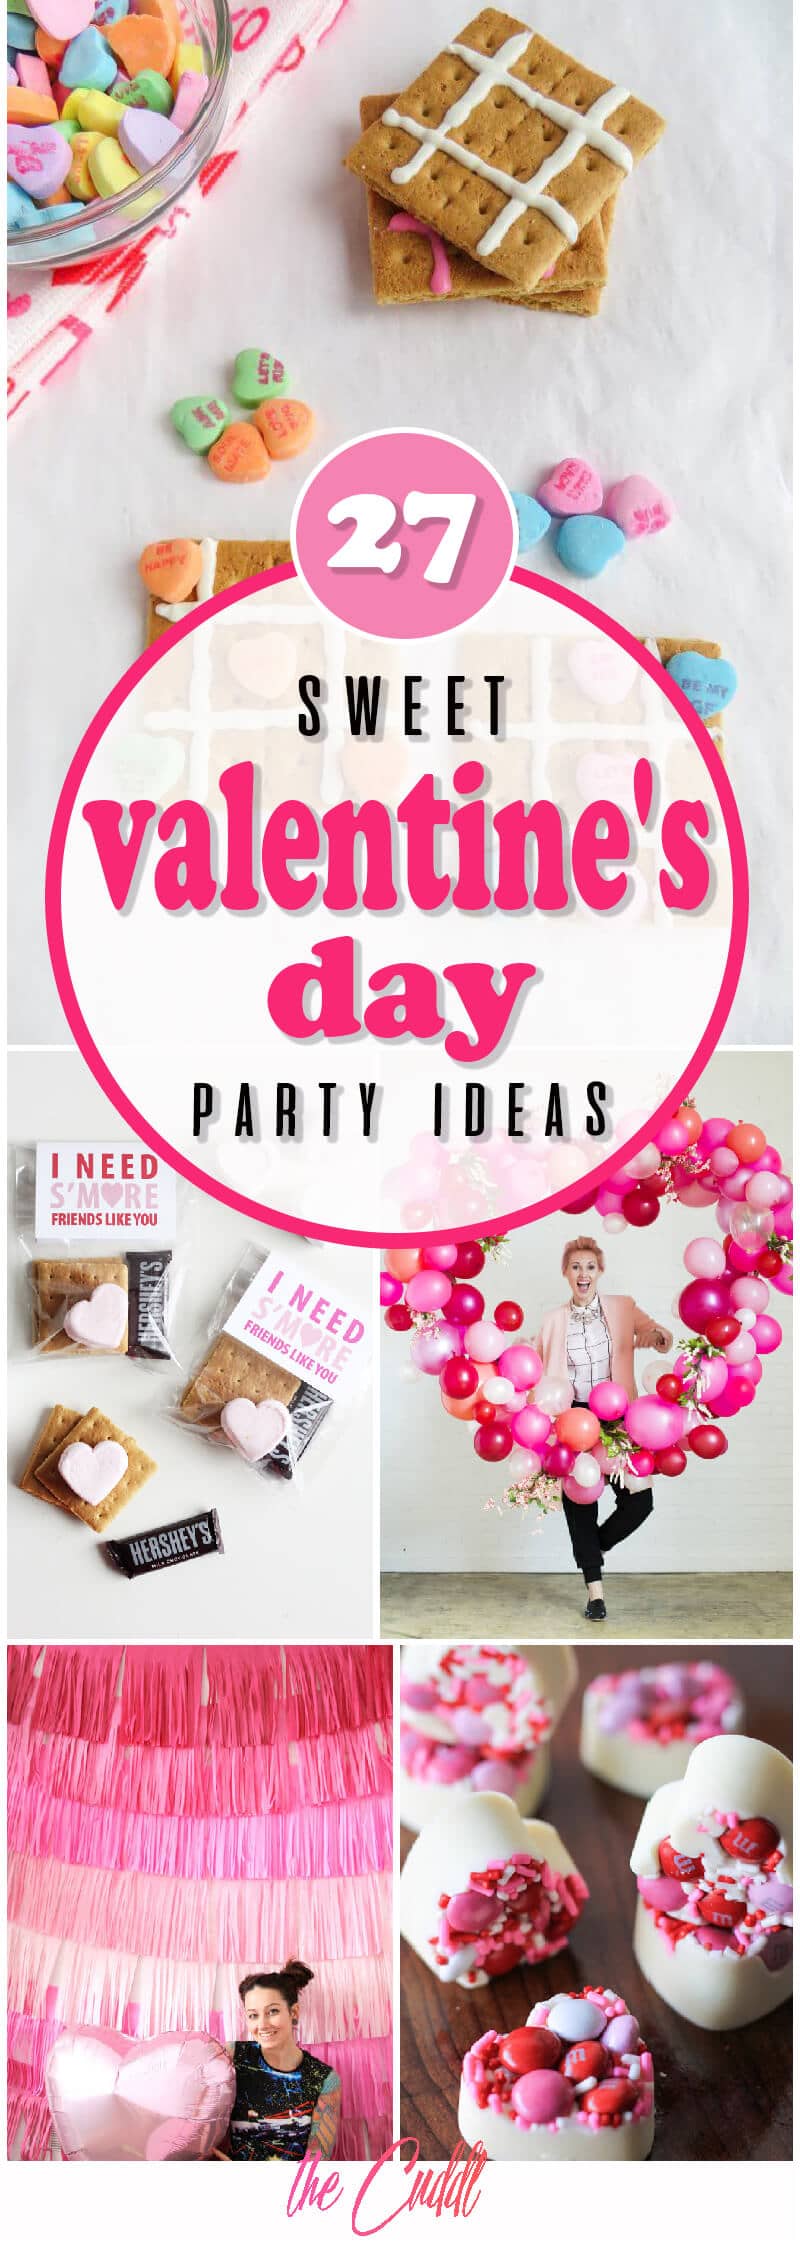 27 Sweet Valentine's Day Party Ideas to Show Your Guests Some Love